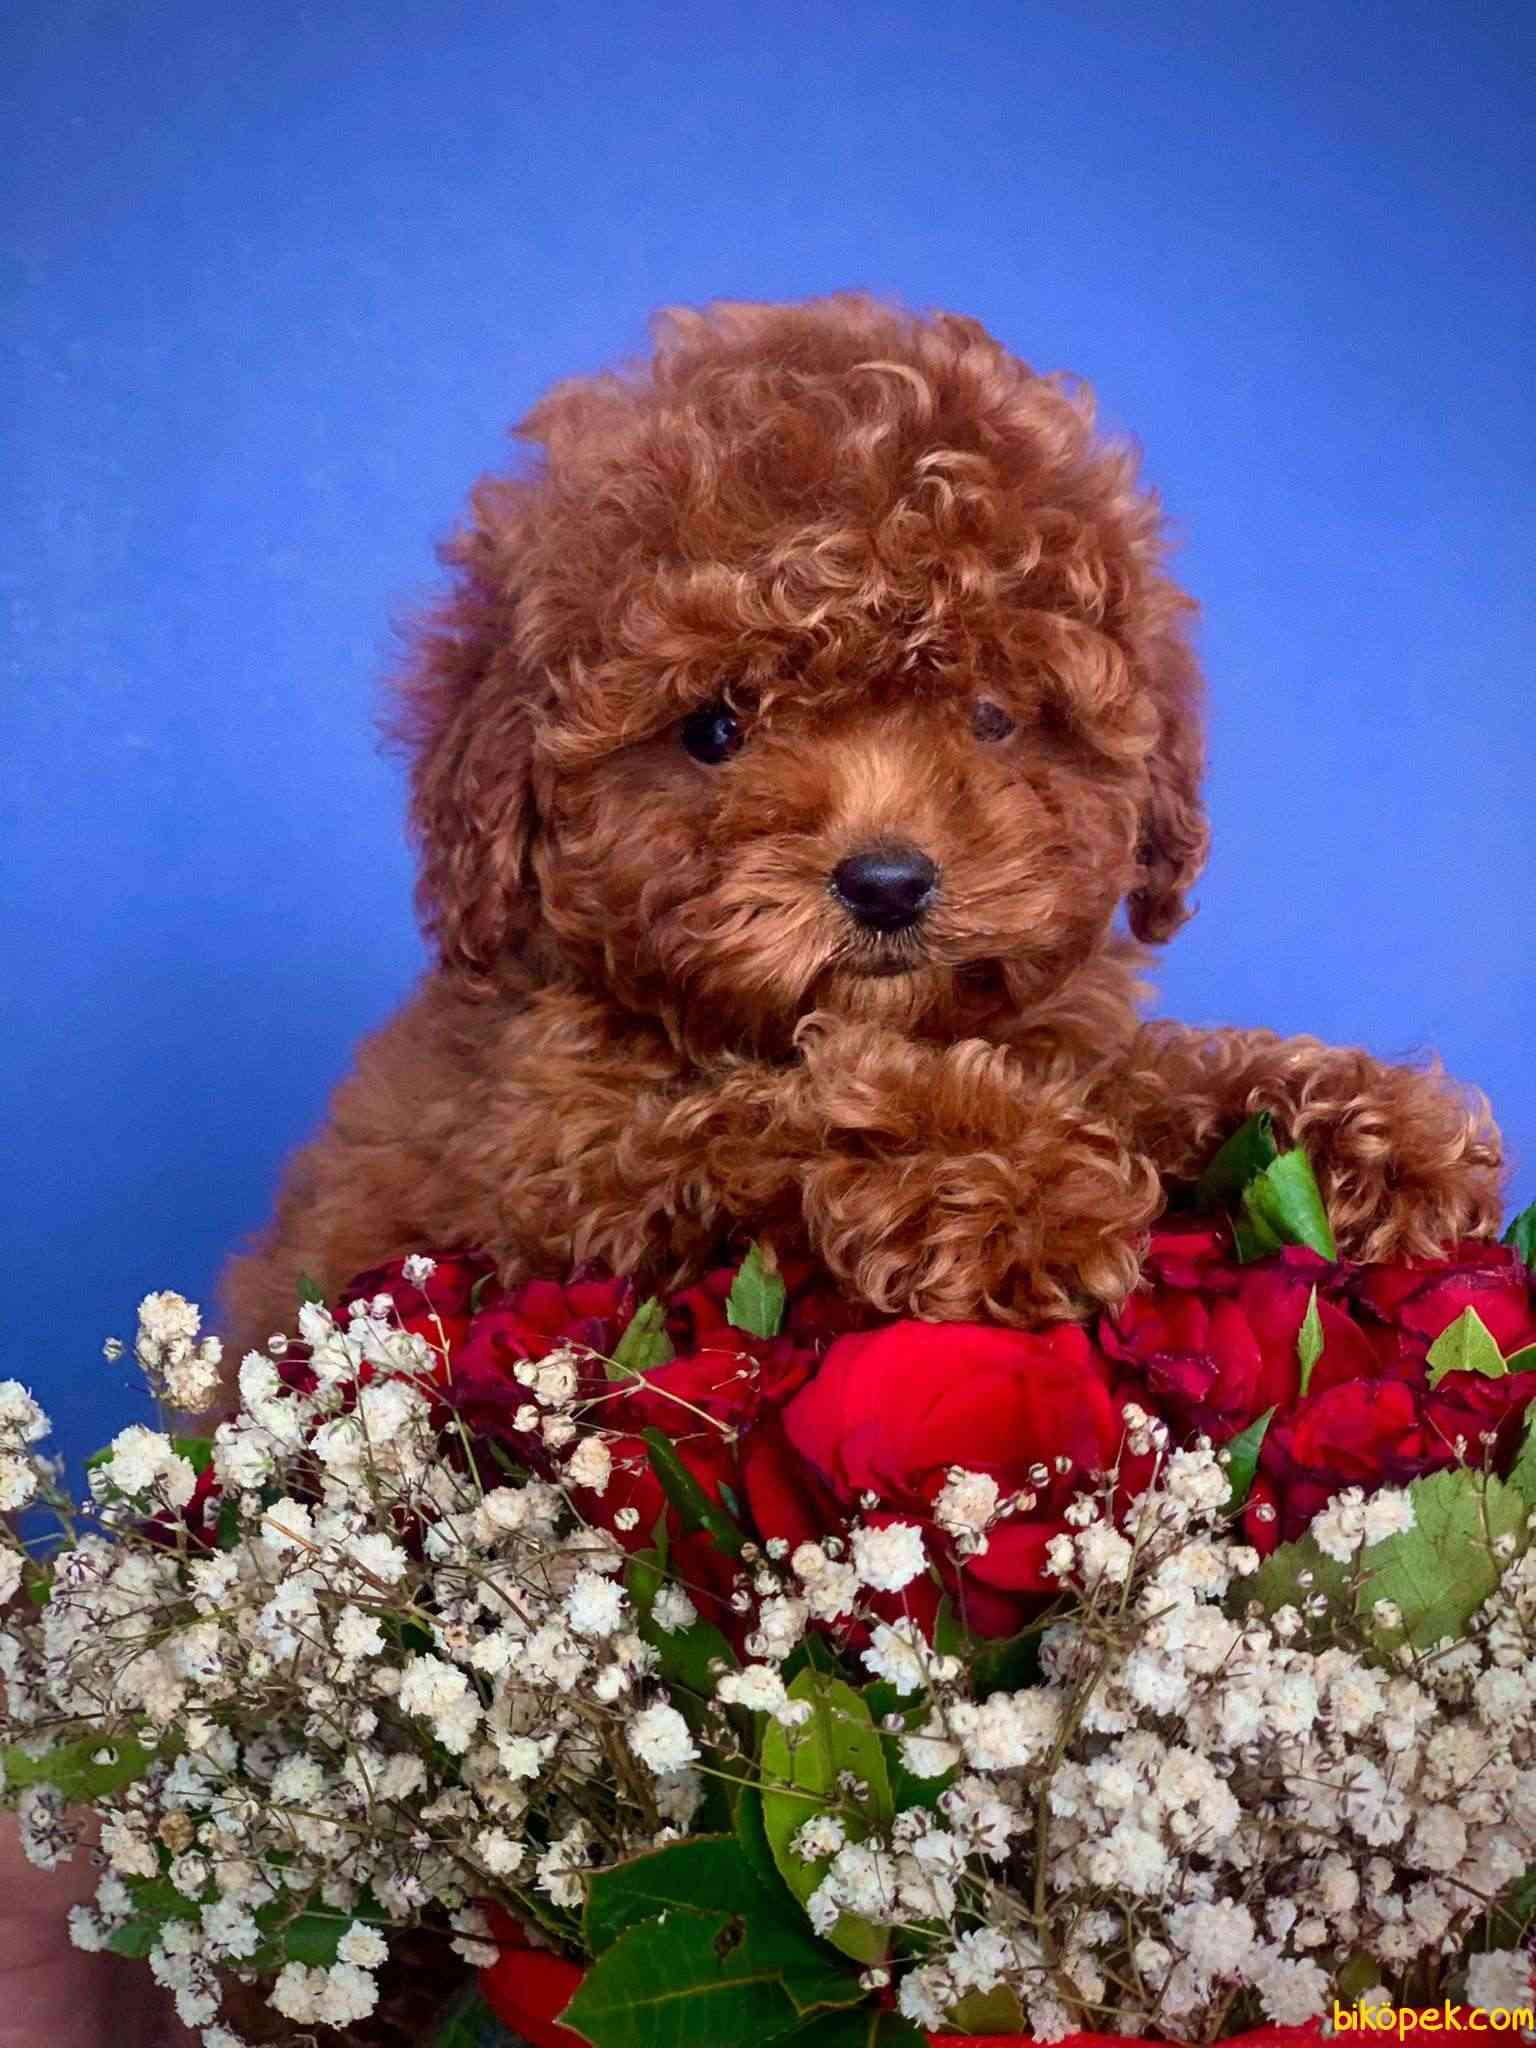 TEA CUP RED POODLE 4